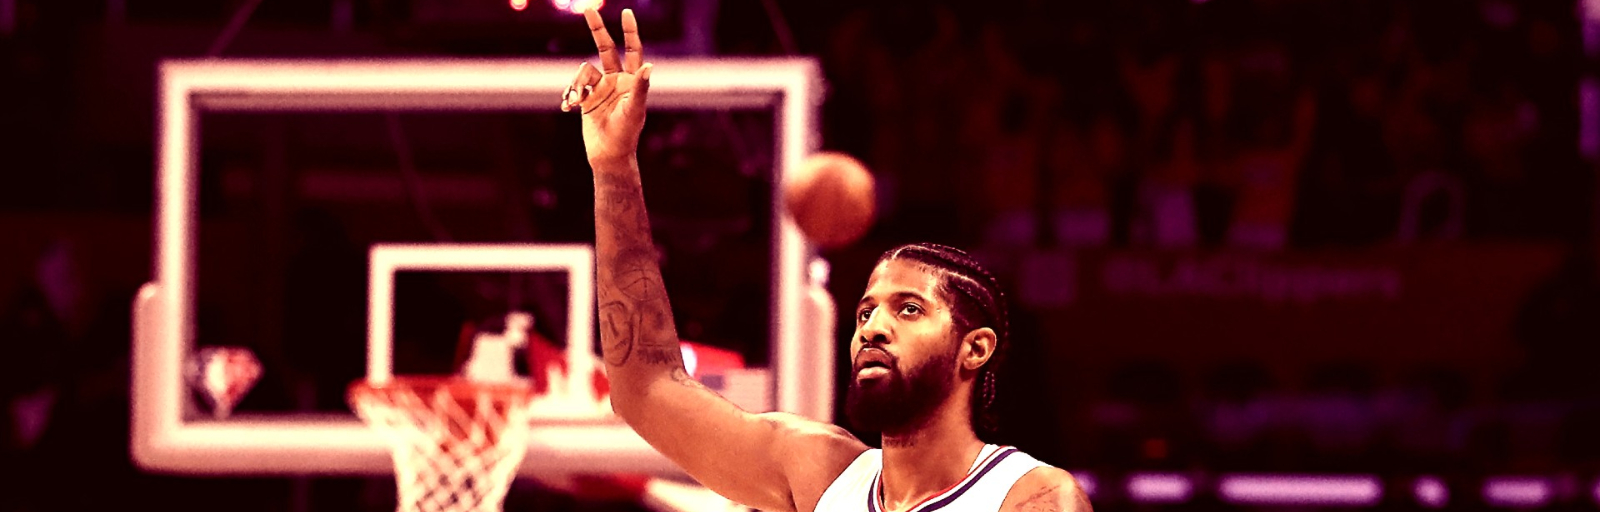 paul george los angeles clippers